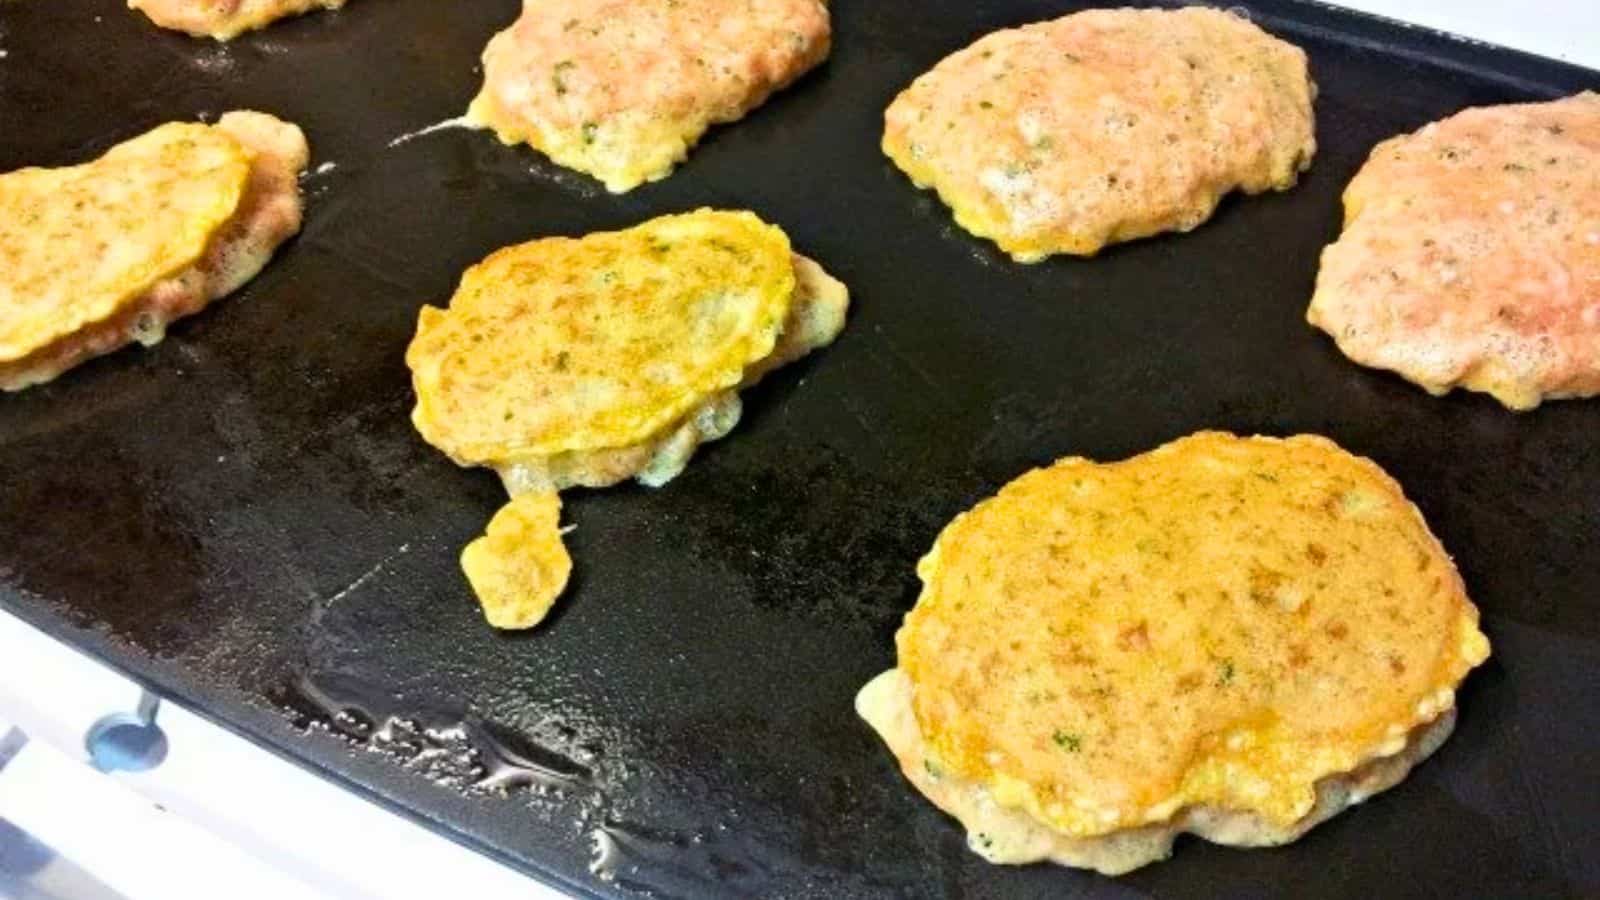 Image shows Ground Turkey Pancakes cooking on a griddle.